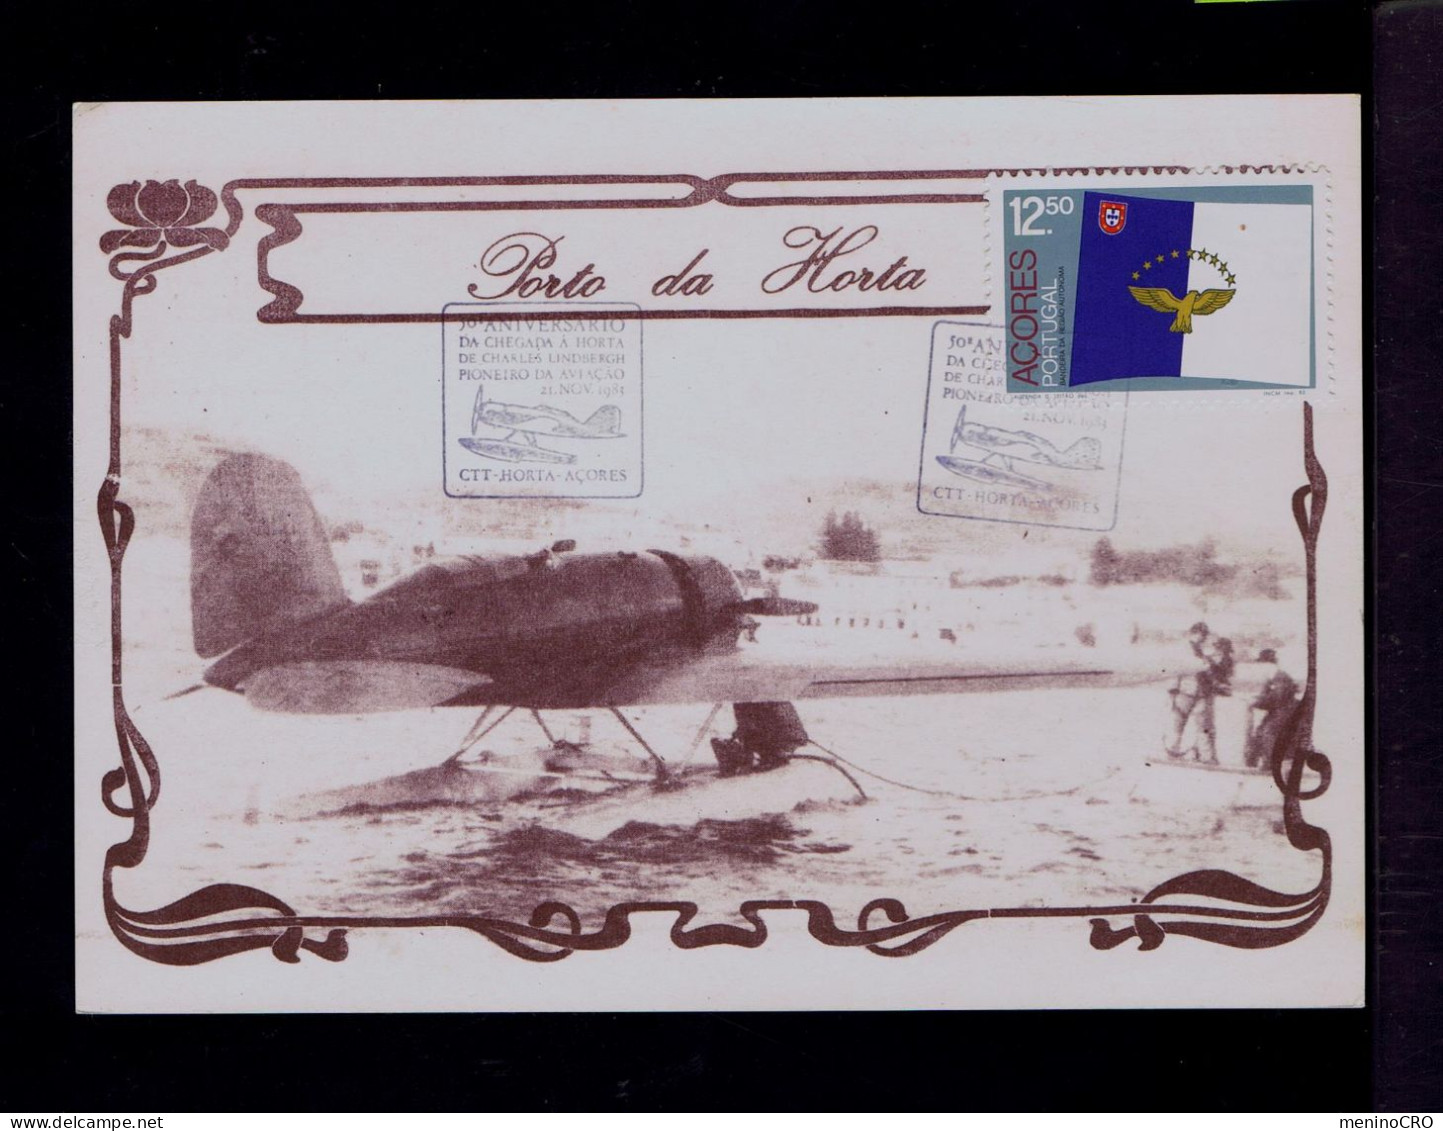 Gc8579 PORTUGAL Airships HORTA City AZORES 1933 (1983 Error) Arrive Charles Lindebergh 50 Ann. Pioneer Aviation Avions - Montgolfier